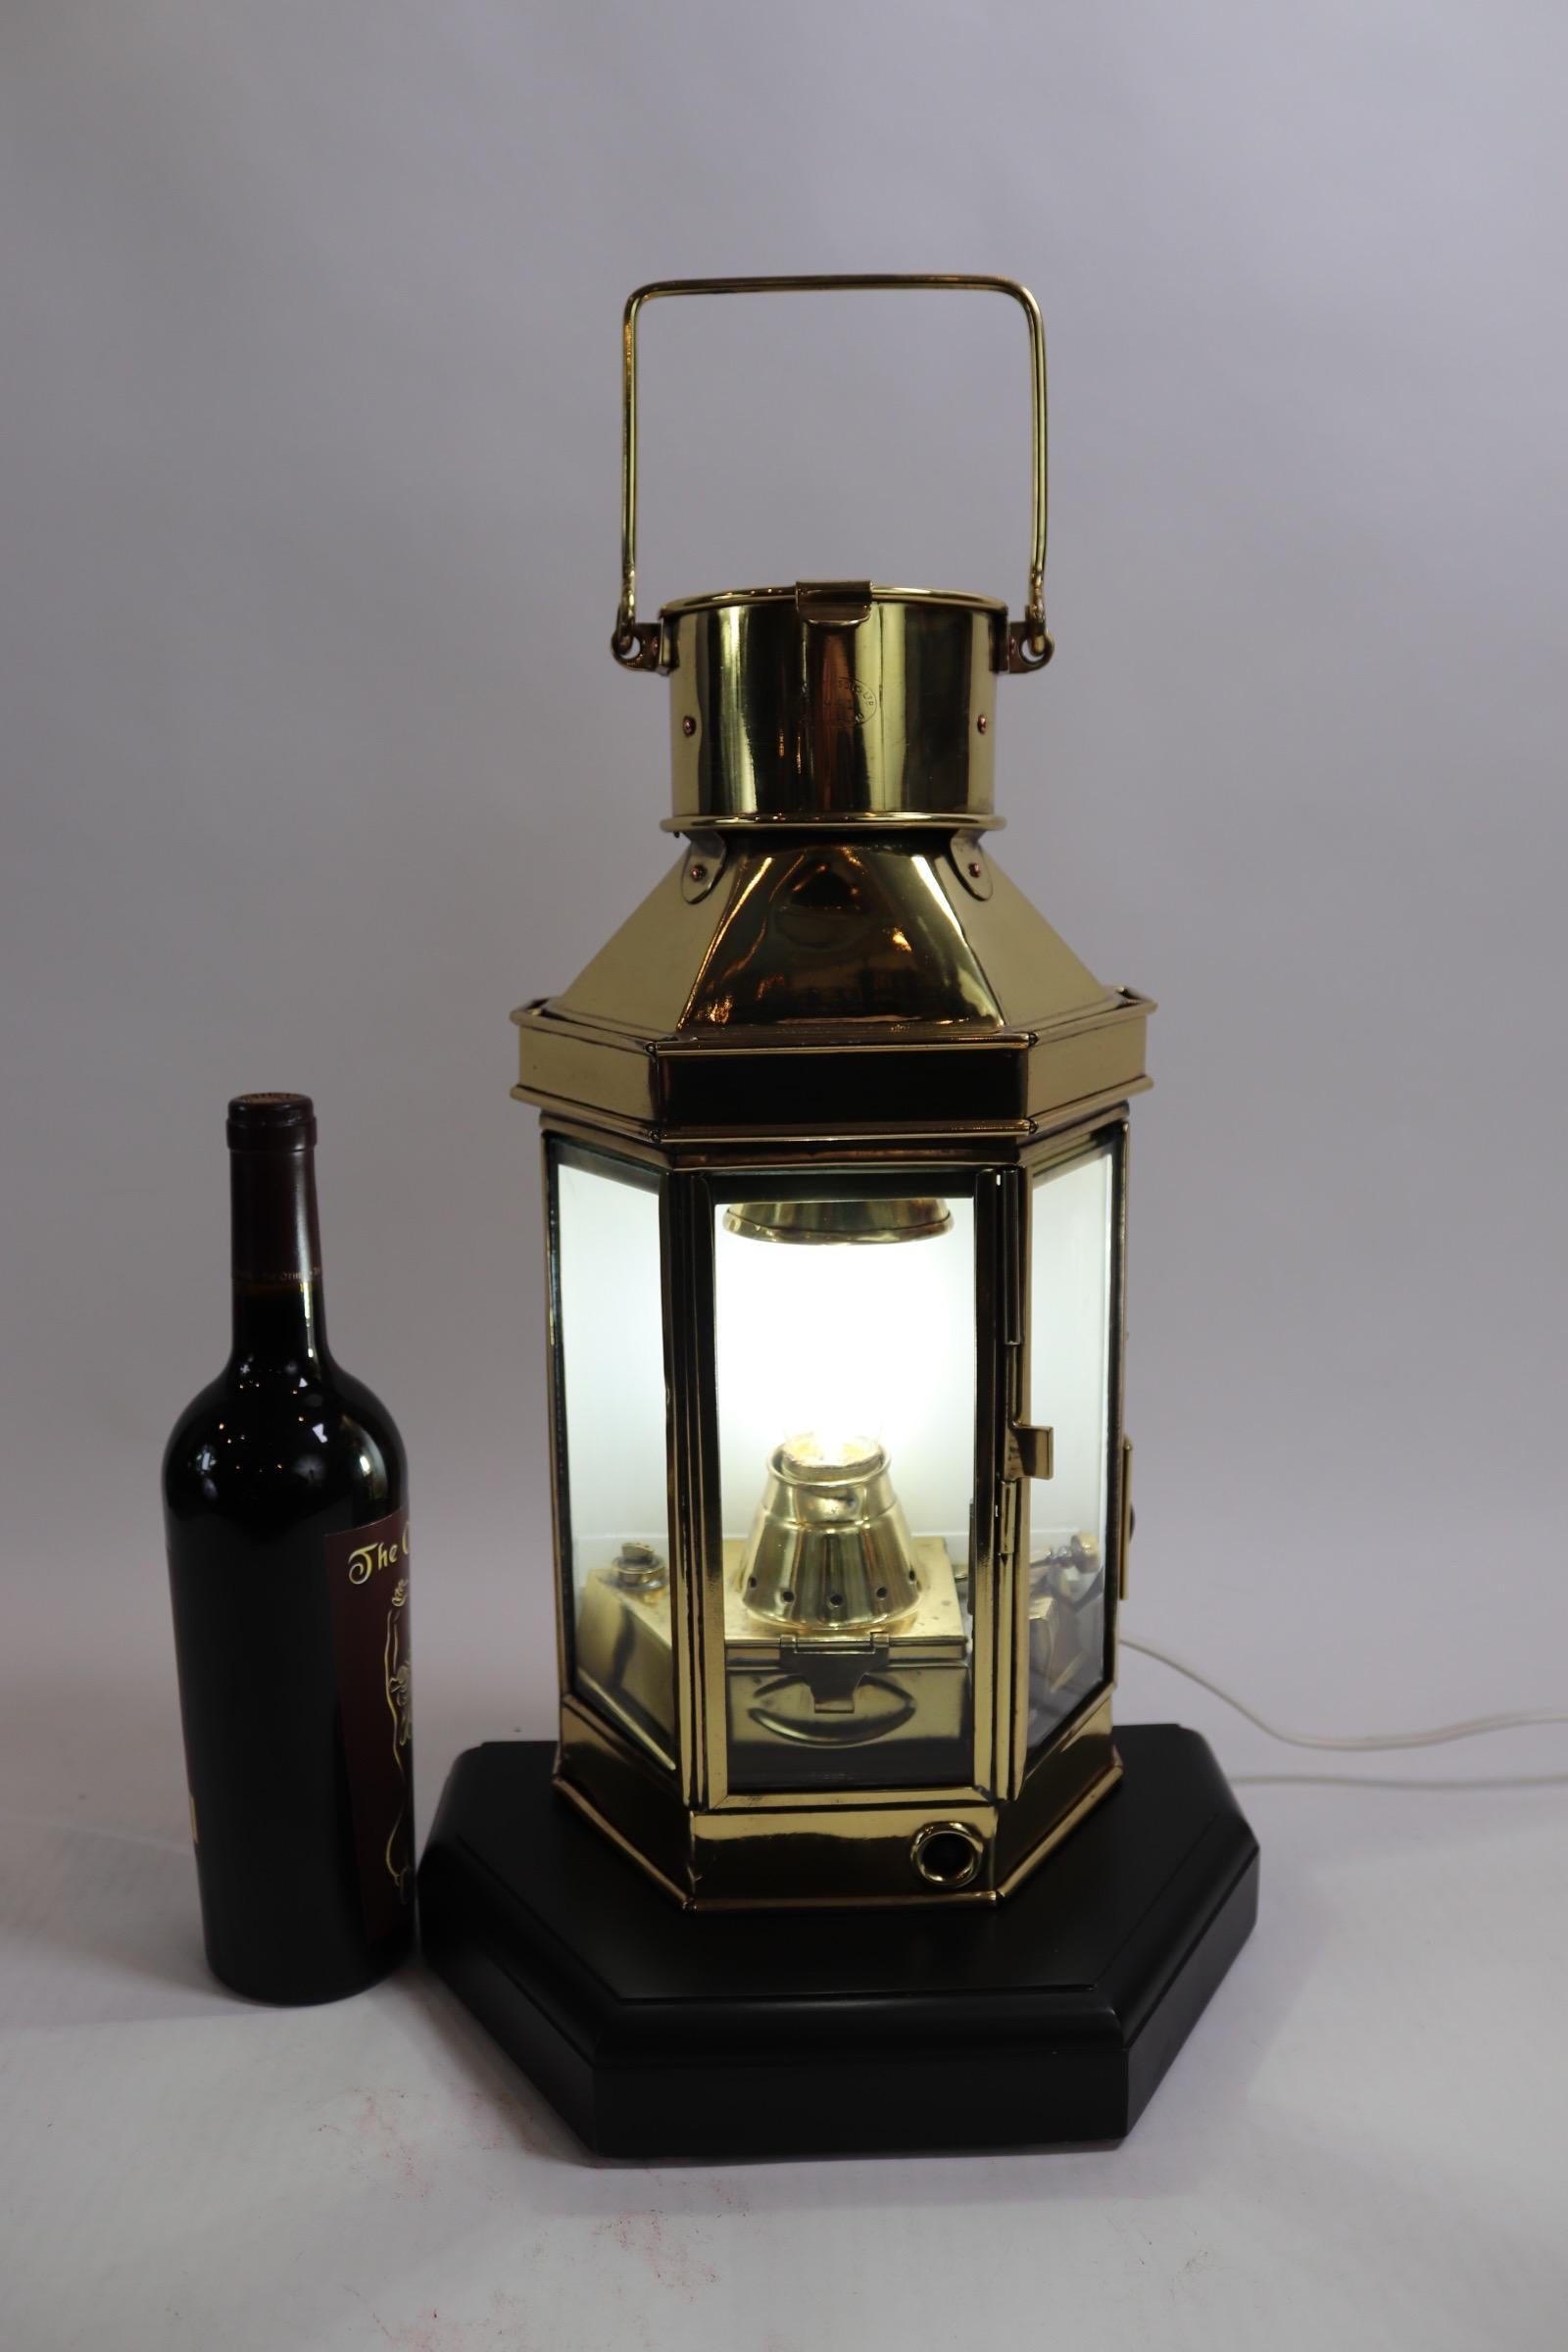 Solid brass ships cabin lantern with highly polished and lacquered finish, mounted to a thick custom wood base with rich dark finish. Chimney is engraved with makers name of BULPITT and Sons Birmingham, 1941. Weight is 14 pounds.